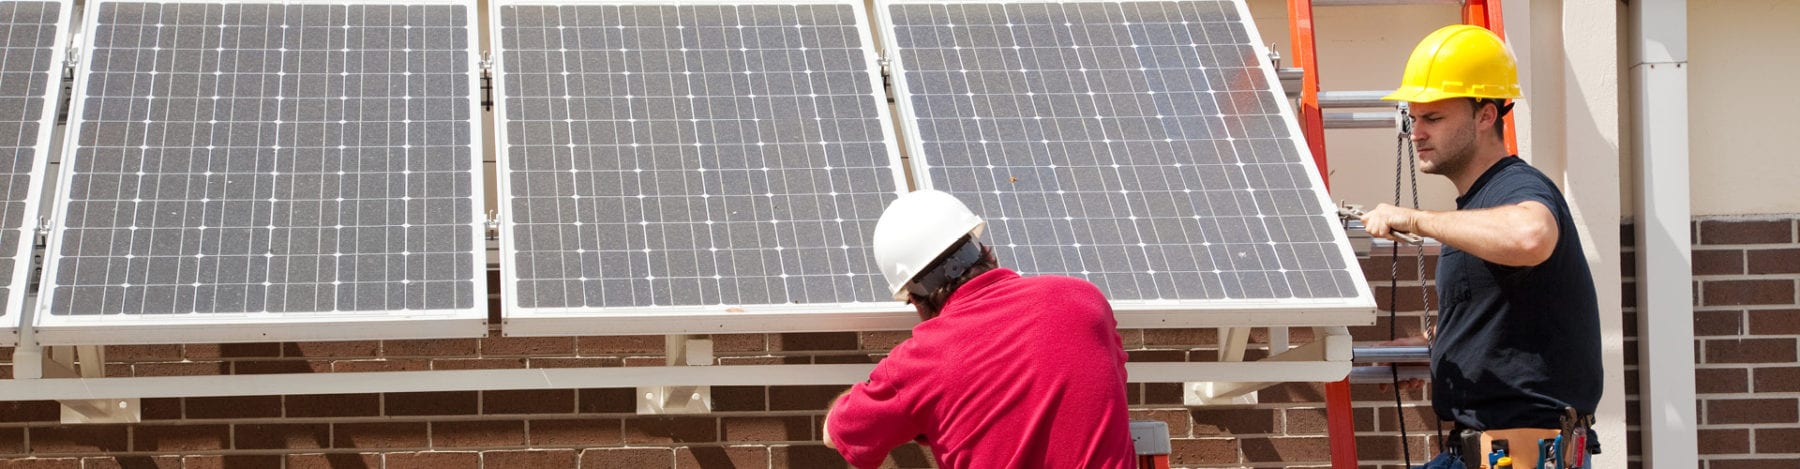 Two SunState Solar techs providing professional commercial solar energy systems installation services.